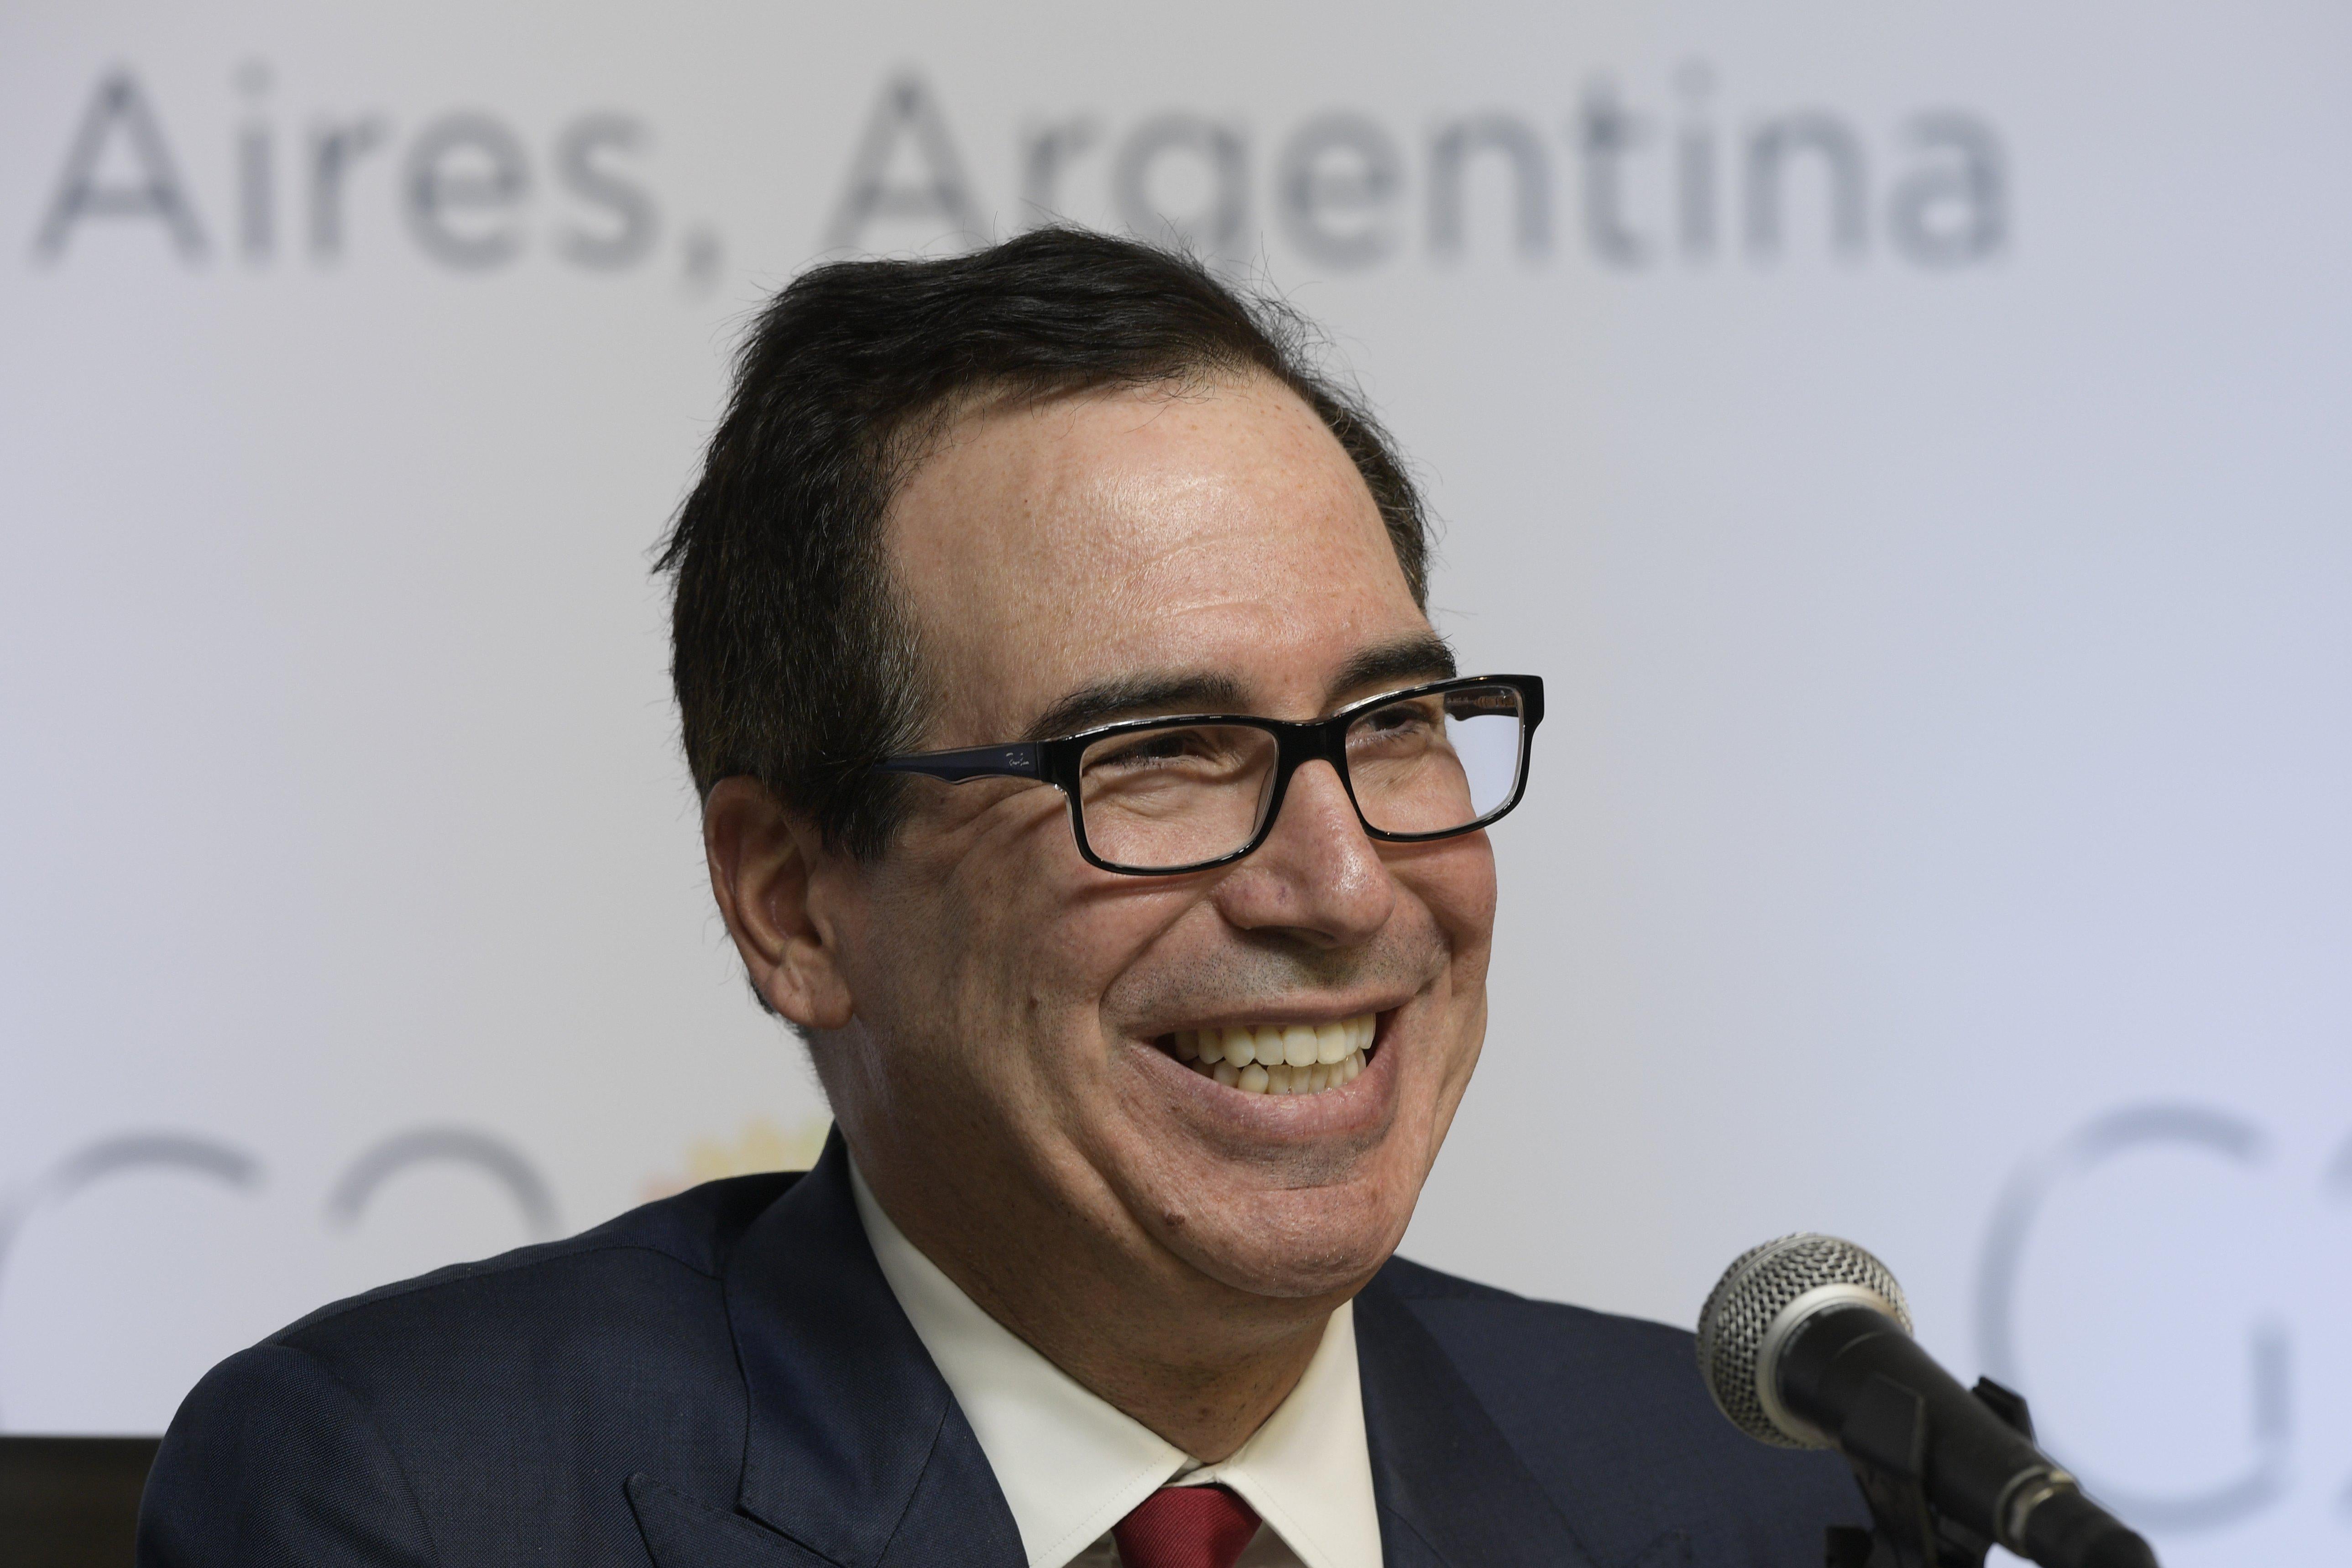 Treasury Secretary Steven Mnuchin delivers a speech during the G20 meeting of Finance Ministers and Central Bank Governors, in Buenos Aires, on March 20, 2018.